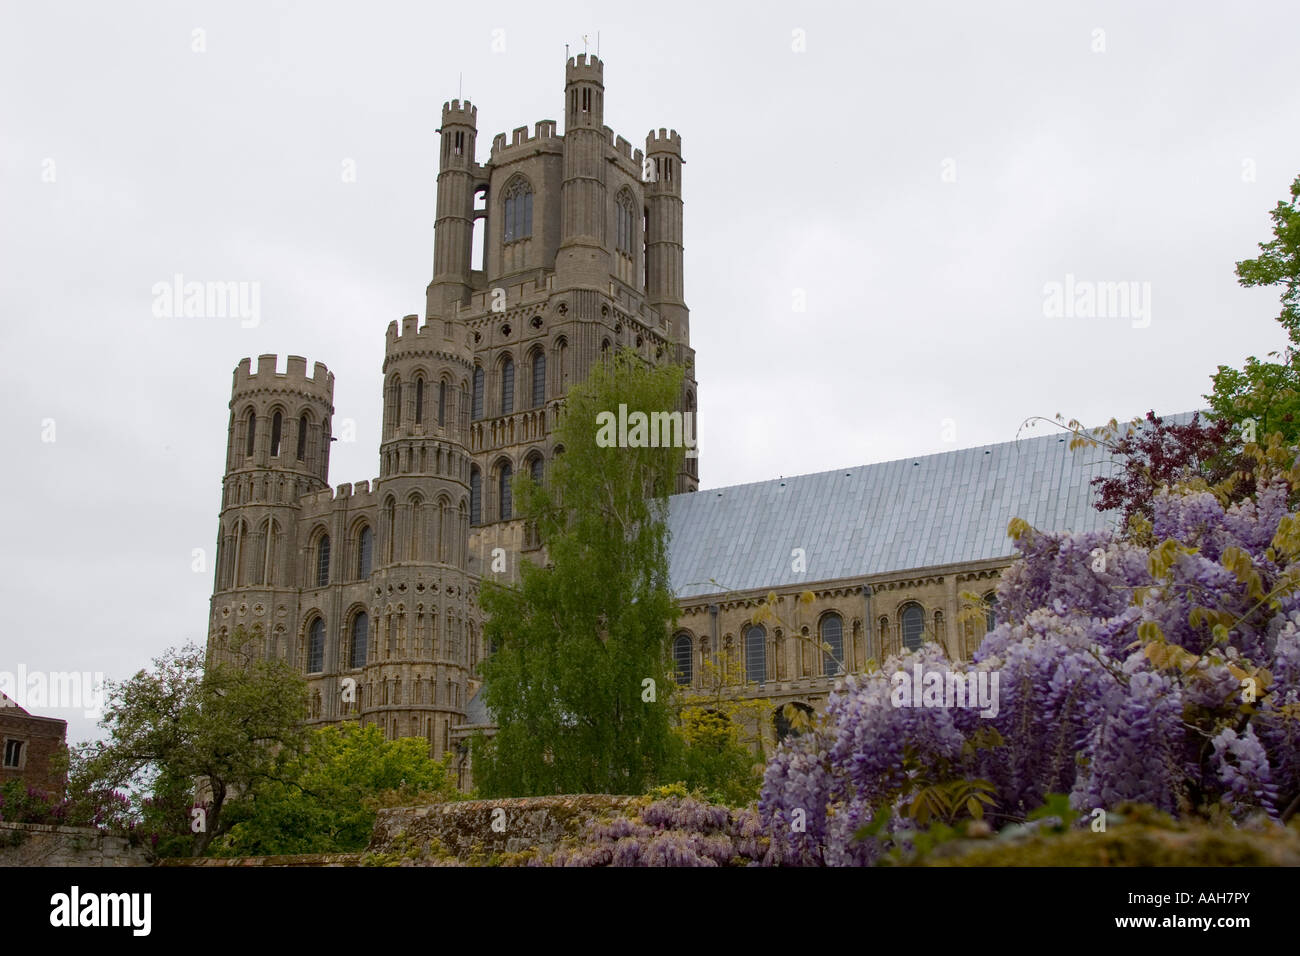 Ely cathedral Ely England Stock Photo